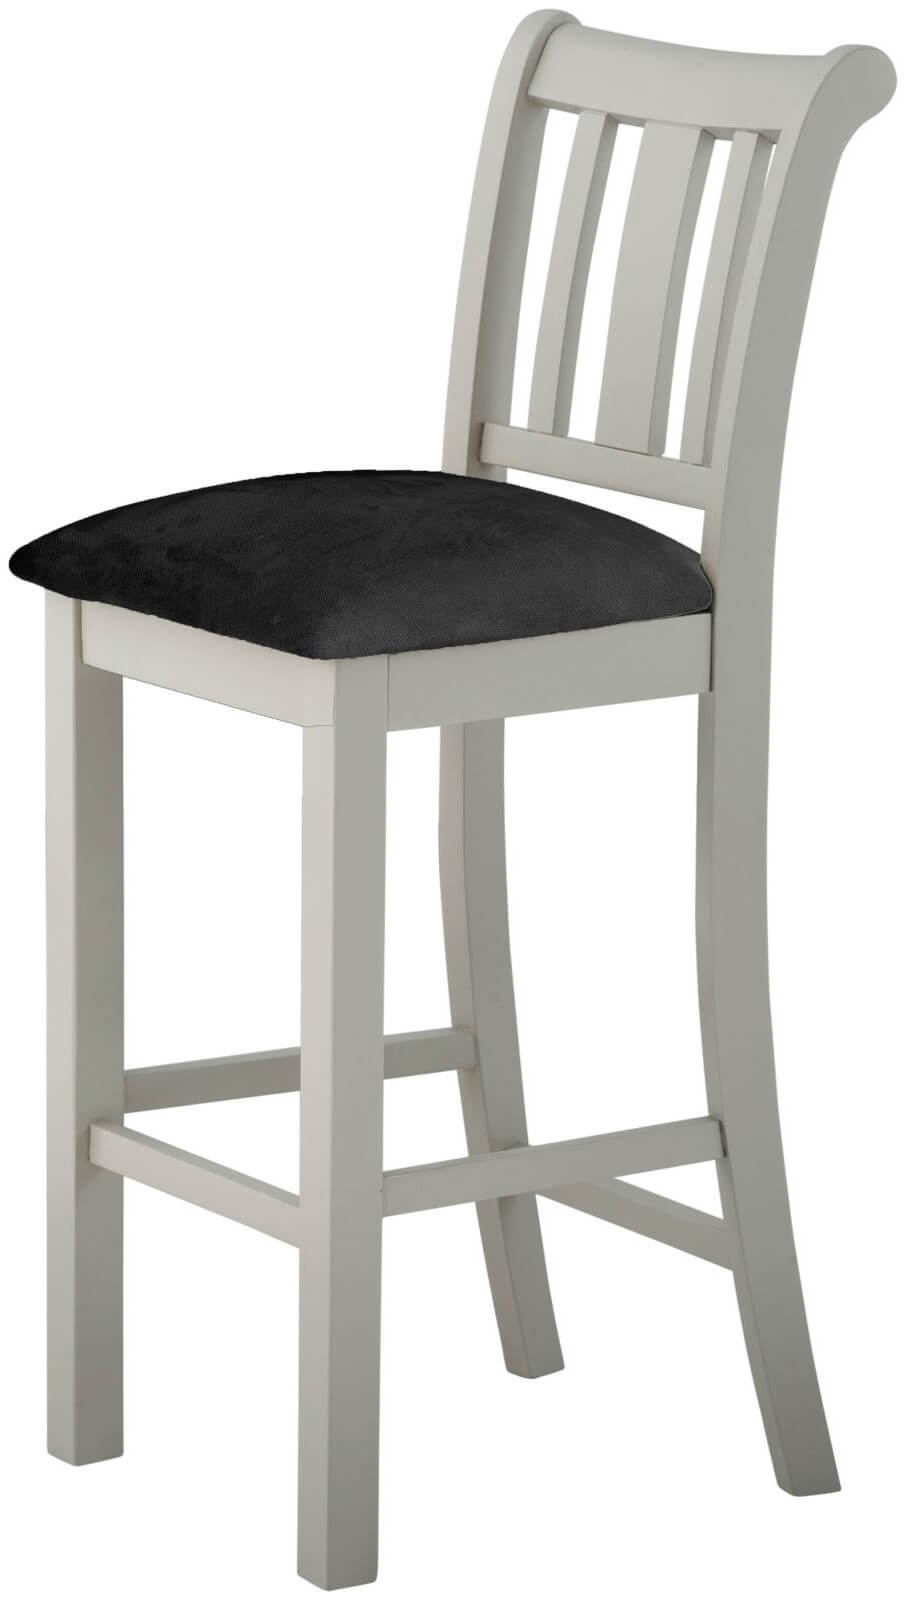 Showing image for Seattle bar stool - stone